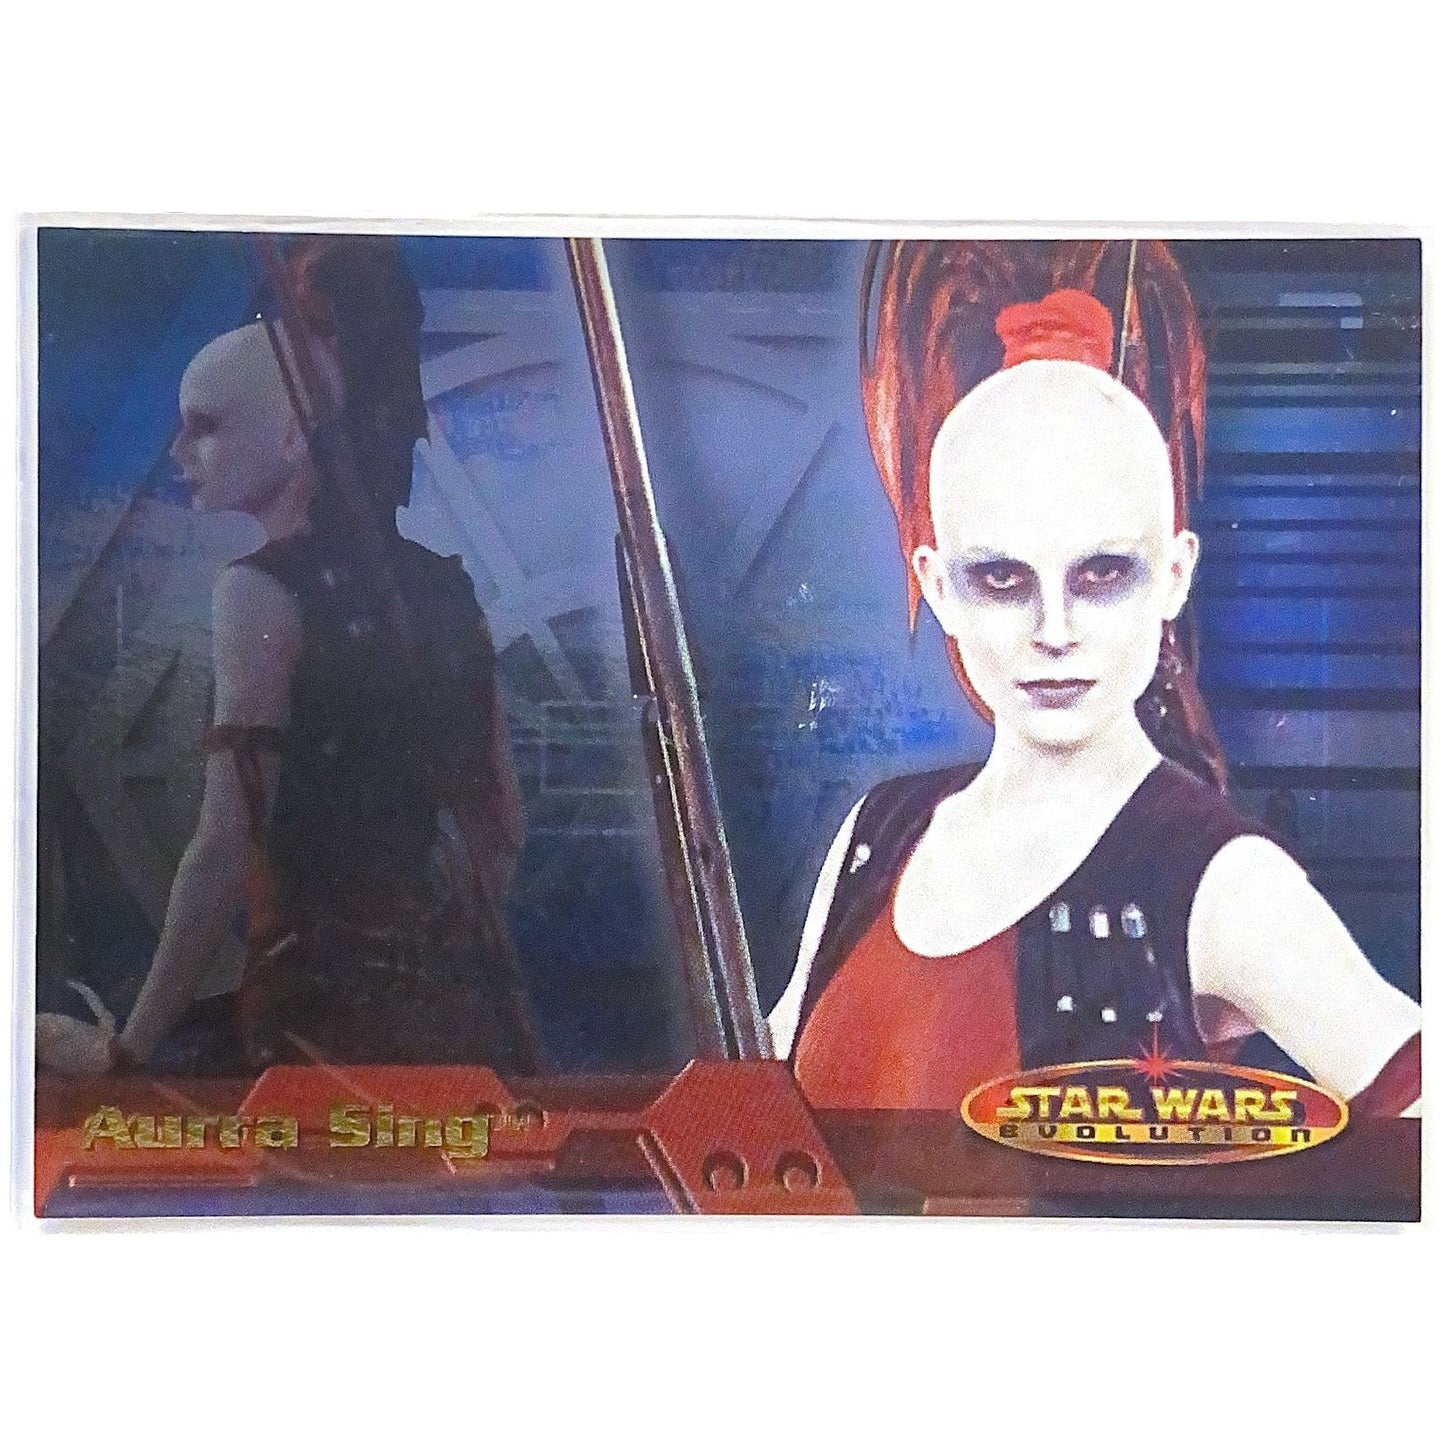  2001 Topps Star Wars Aurra Sing Evolution #6  Local Legends Cards & Collectibles